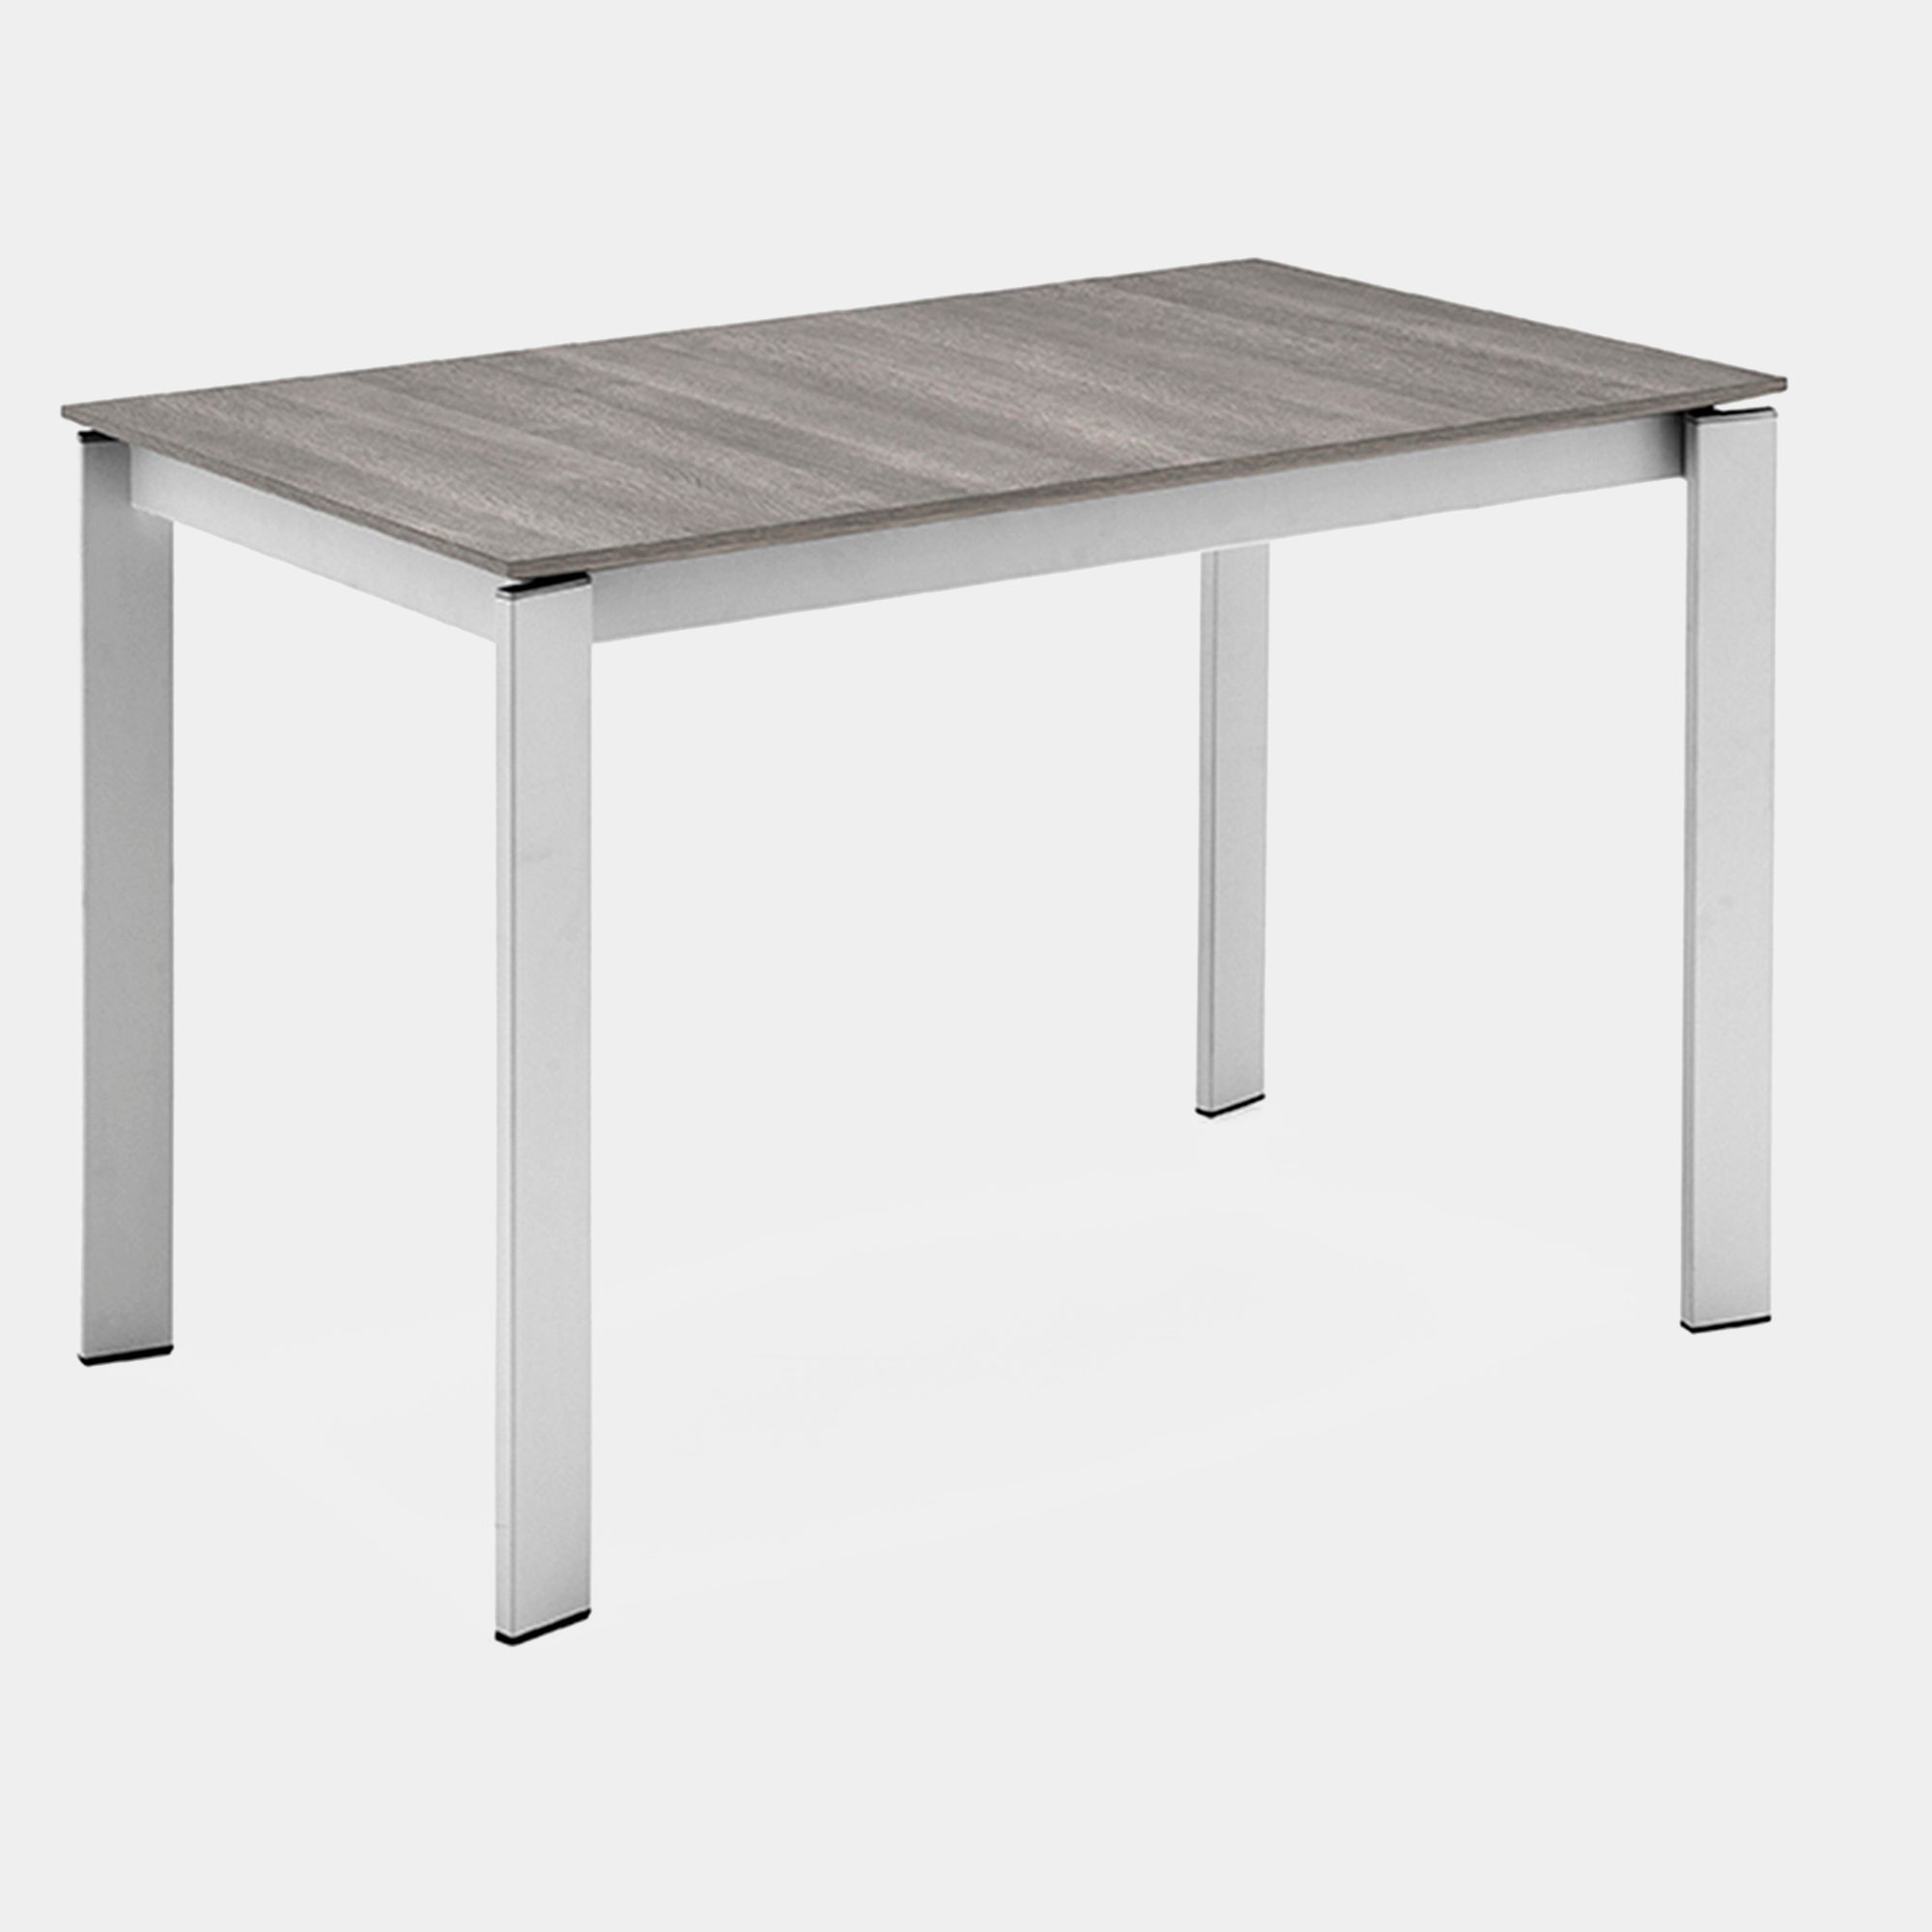 CB4724-MW130A 130cm Ext Dining Table